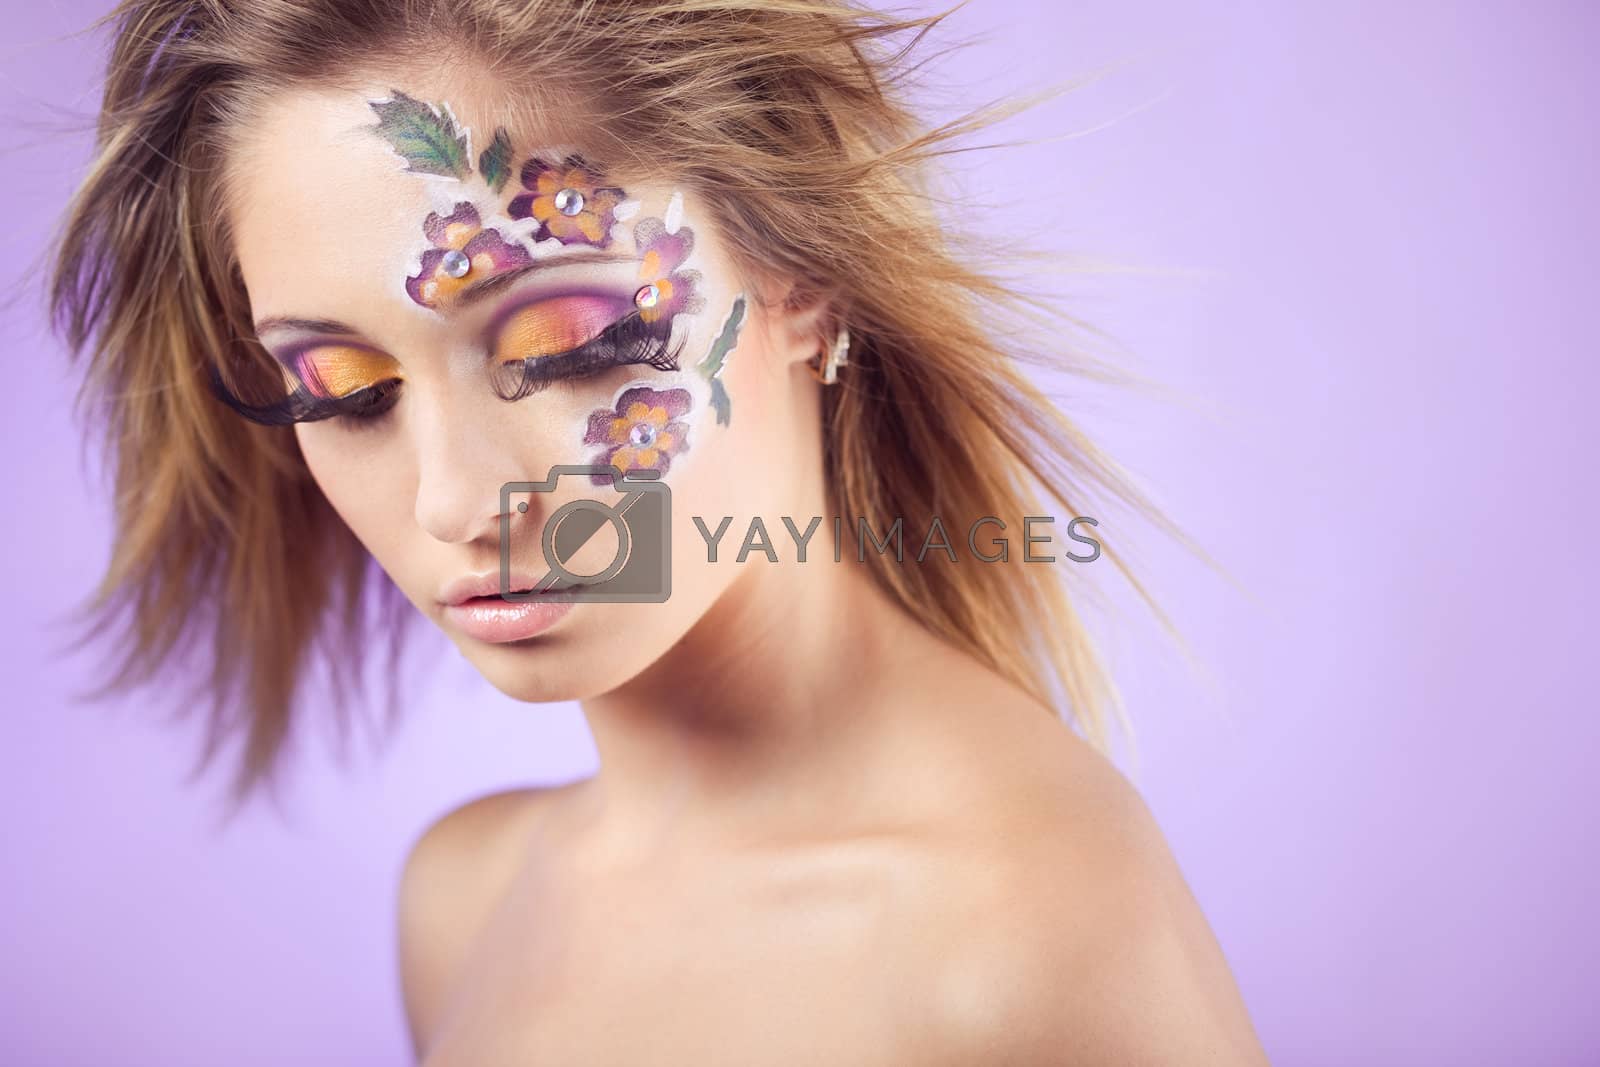 Royalty free image of Face art by alenkasm